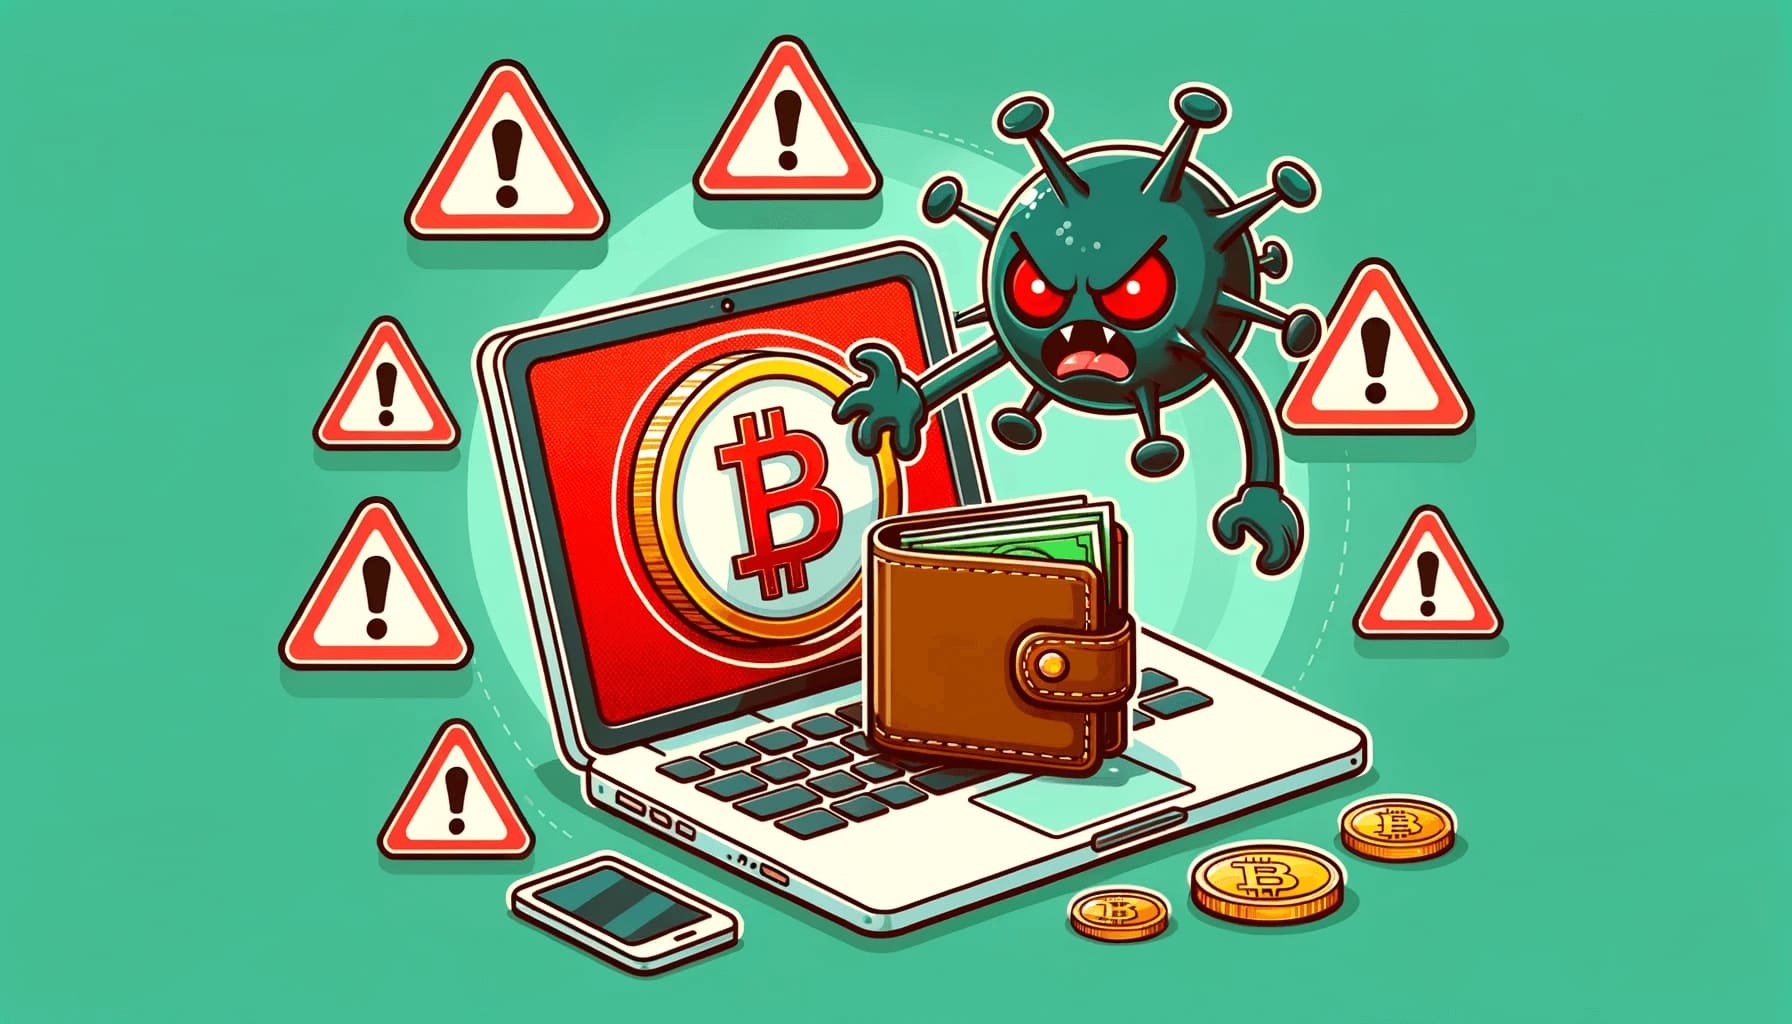 In Bitrace, popular methods of stealing bitcoins have been named.